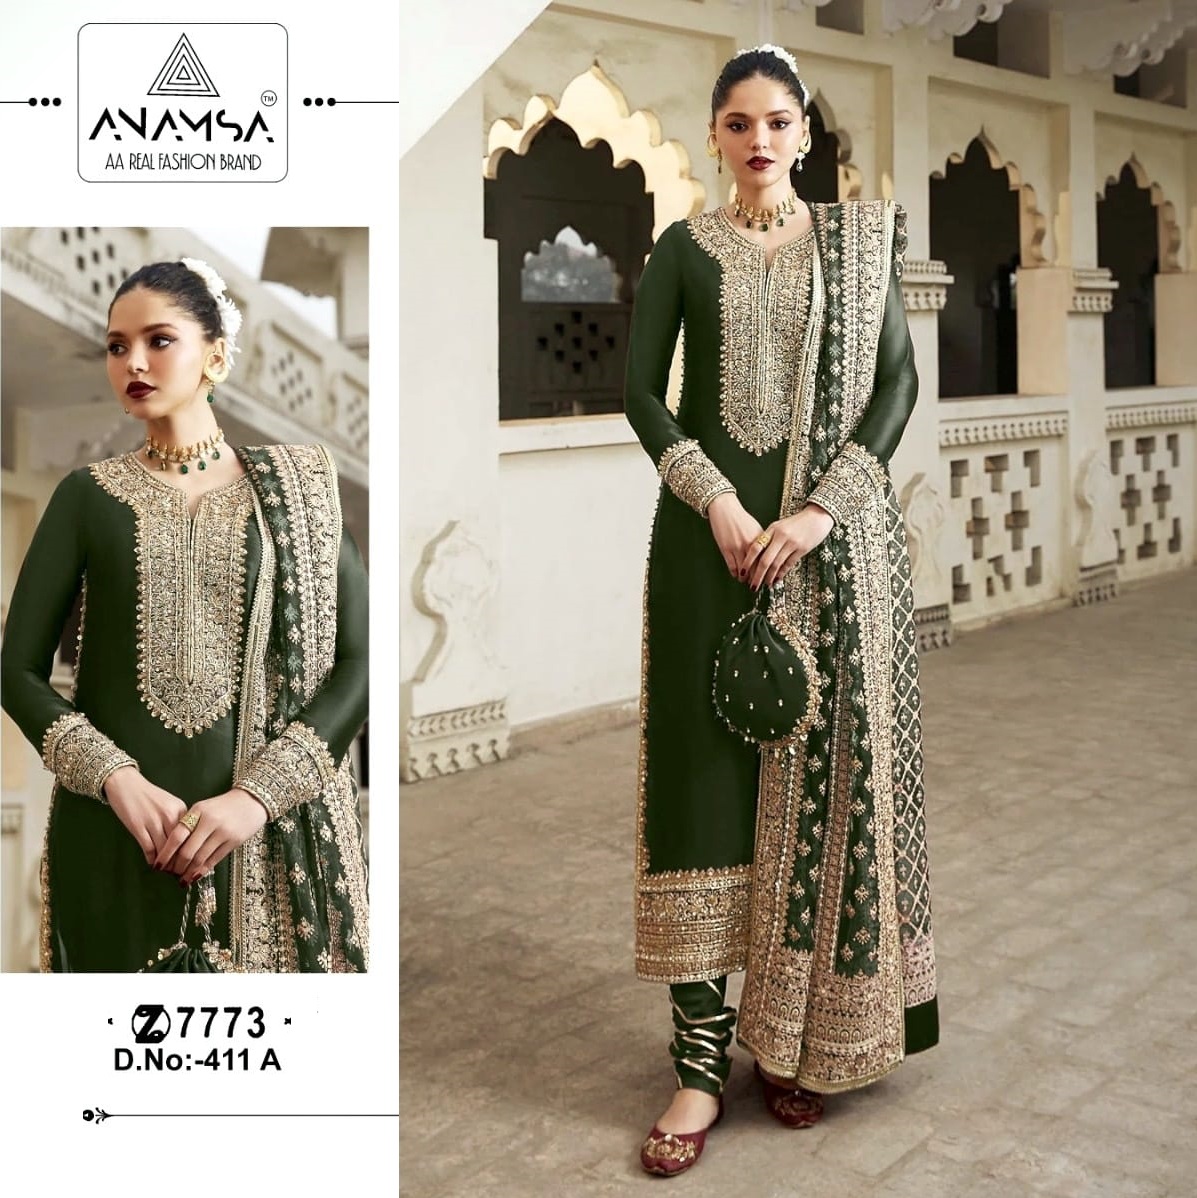 ANAMSA 411 A PAKISTANI SUITS IN INDIA